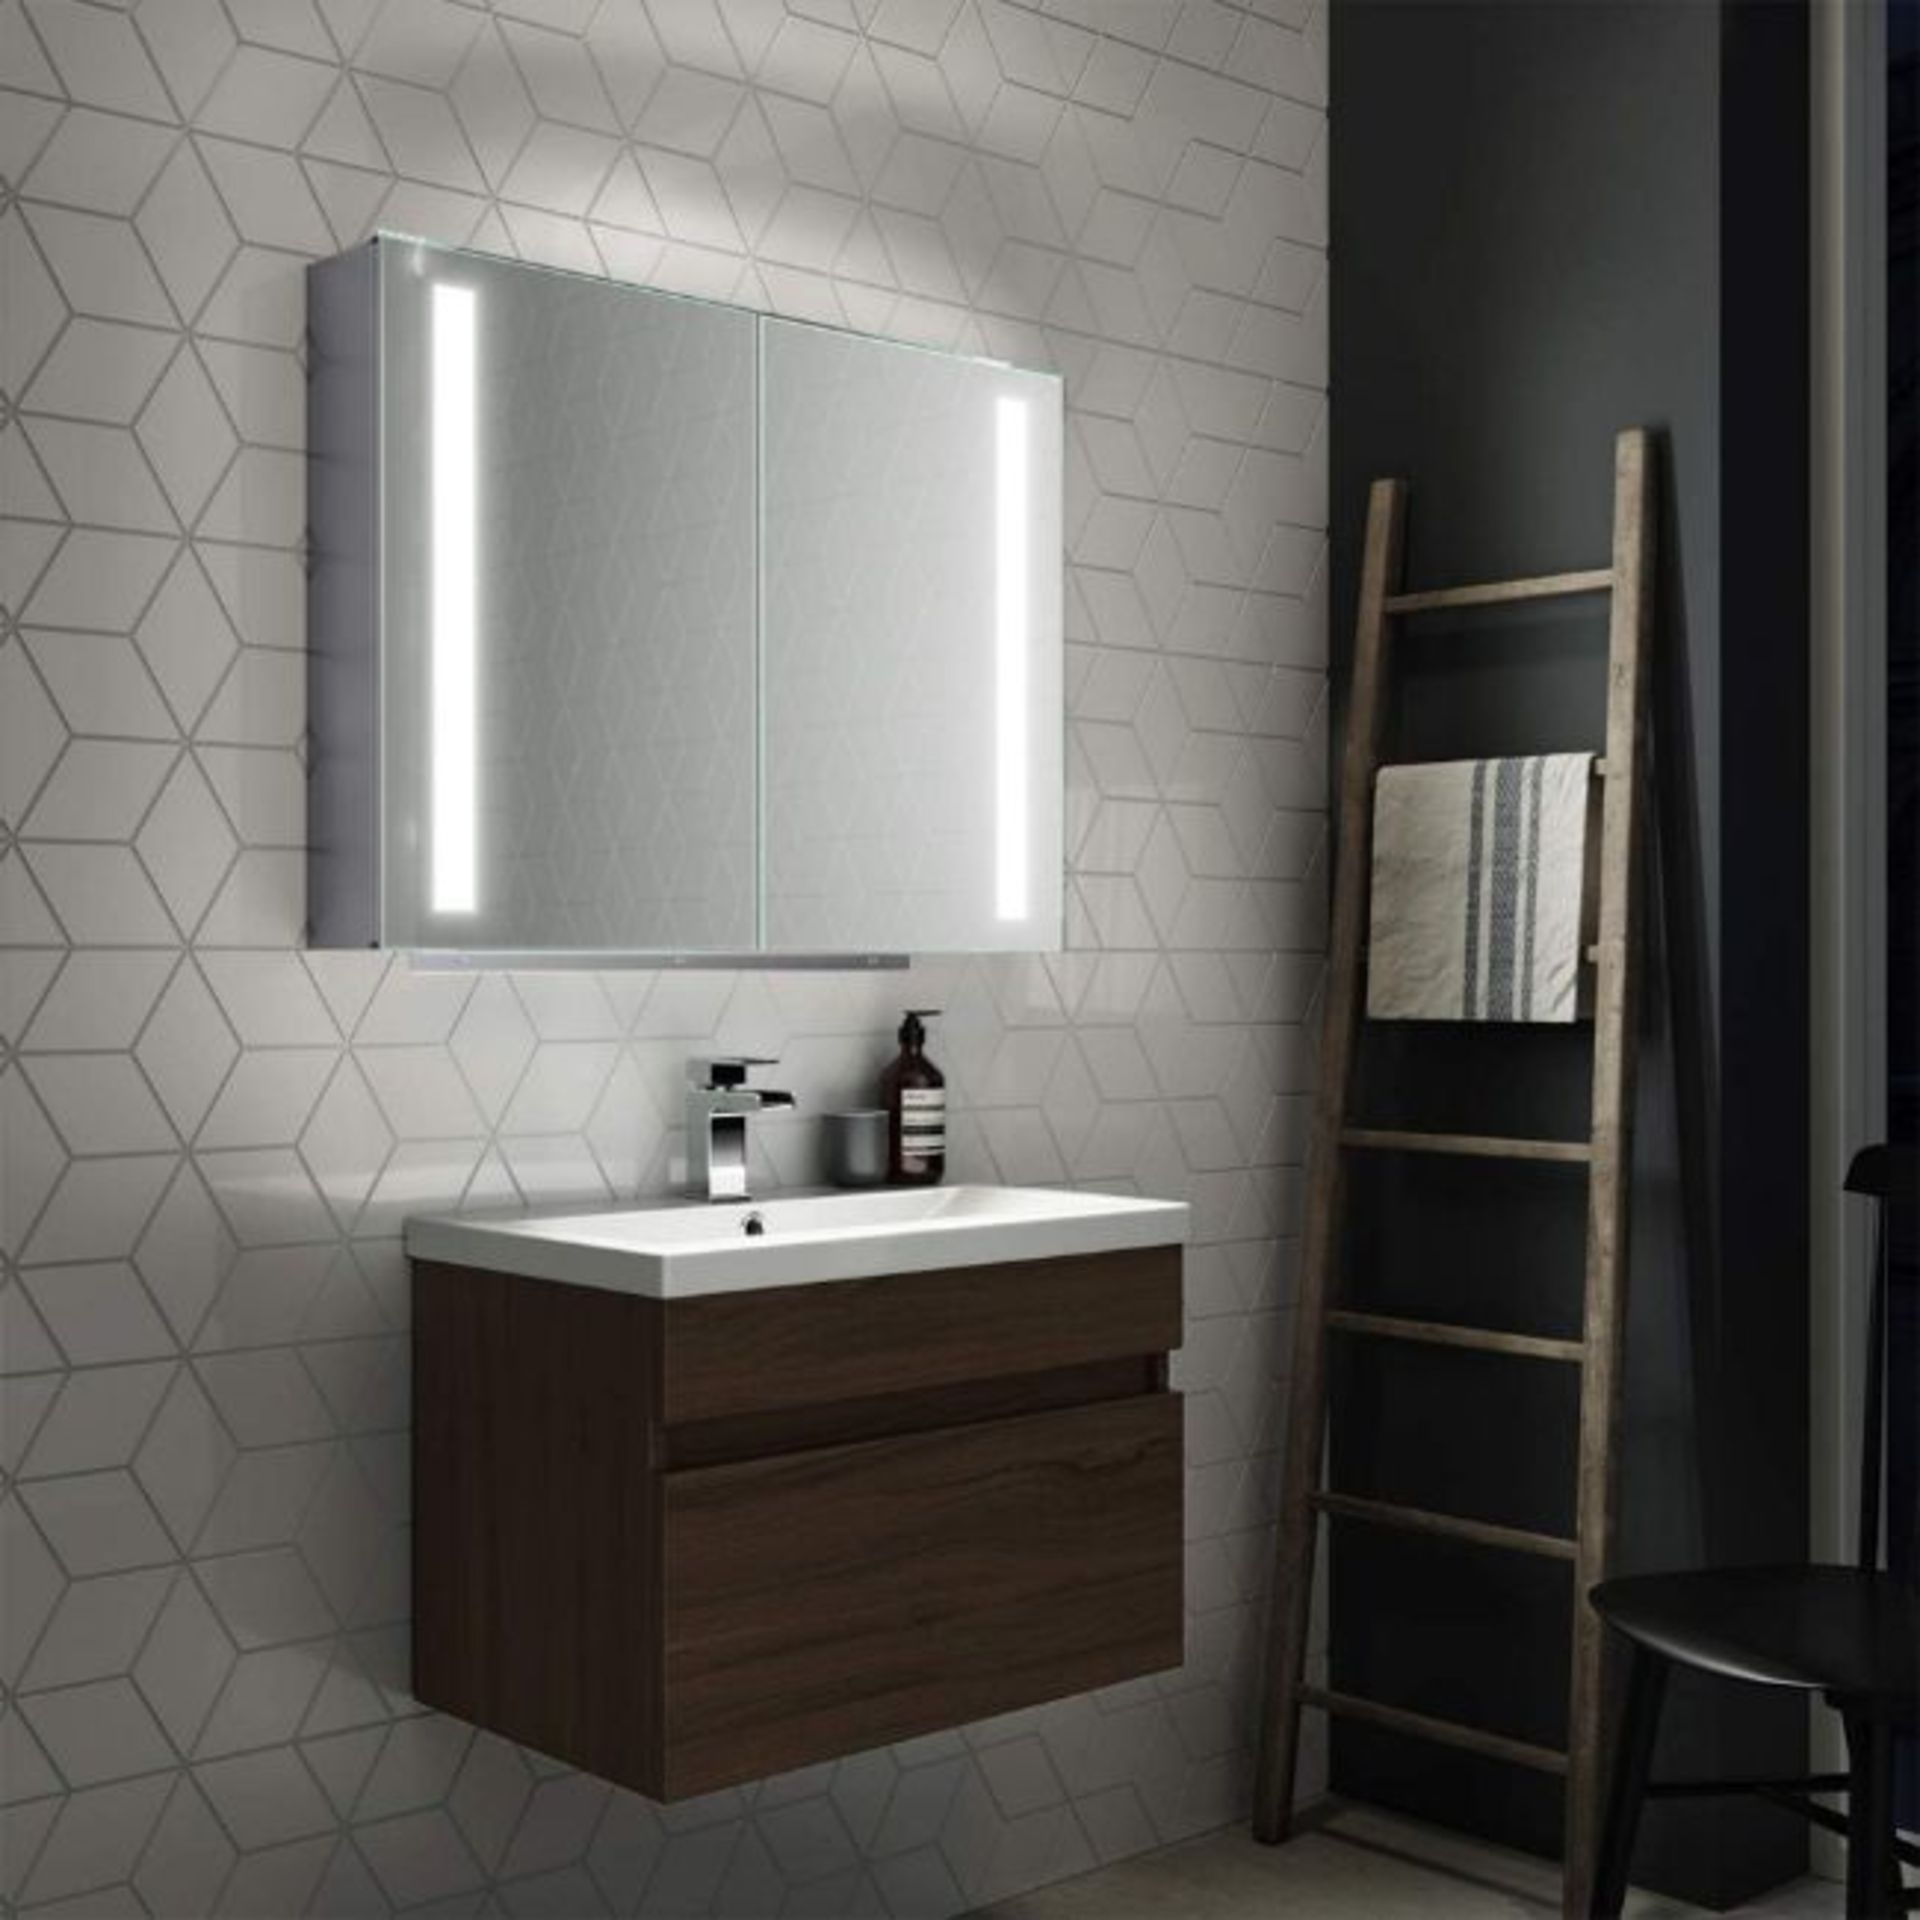 NEW 800x600 Dawn Illuminated LED Mirror Cabinet. RRP £939.99.MC164.We love this mirror cabinet as it - Image 2 of 3